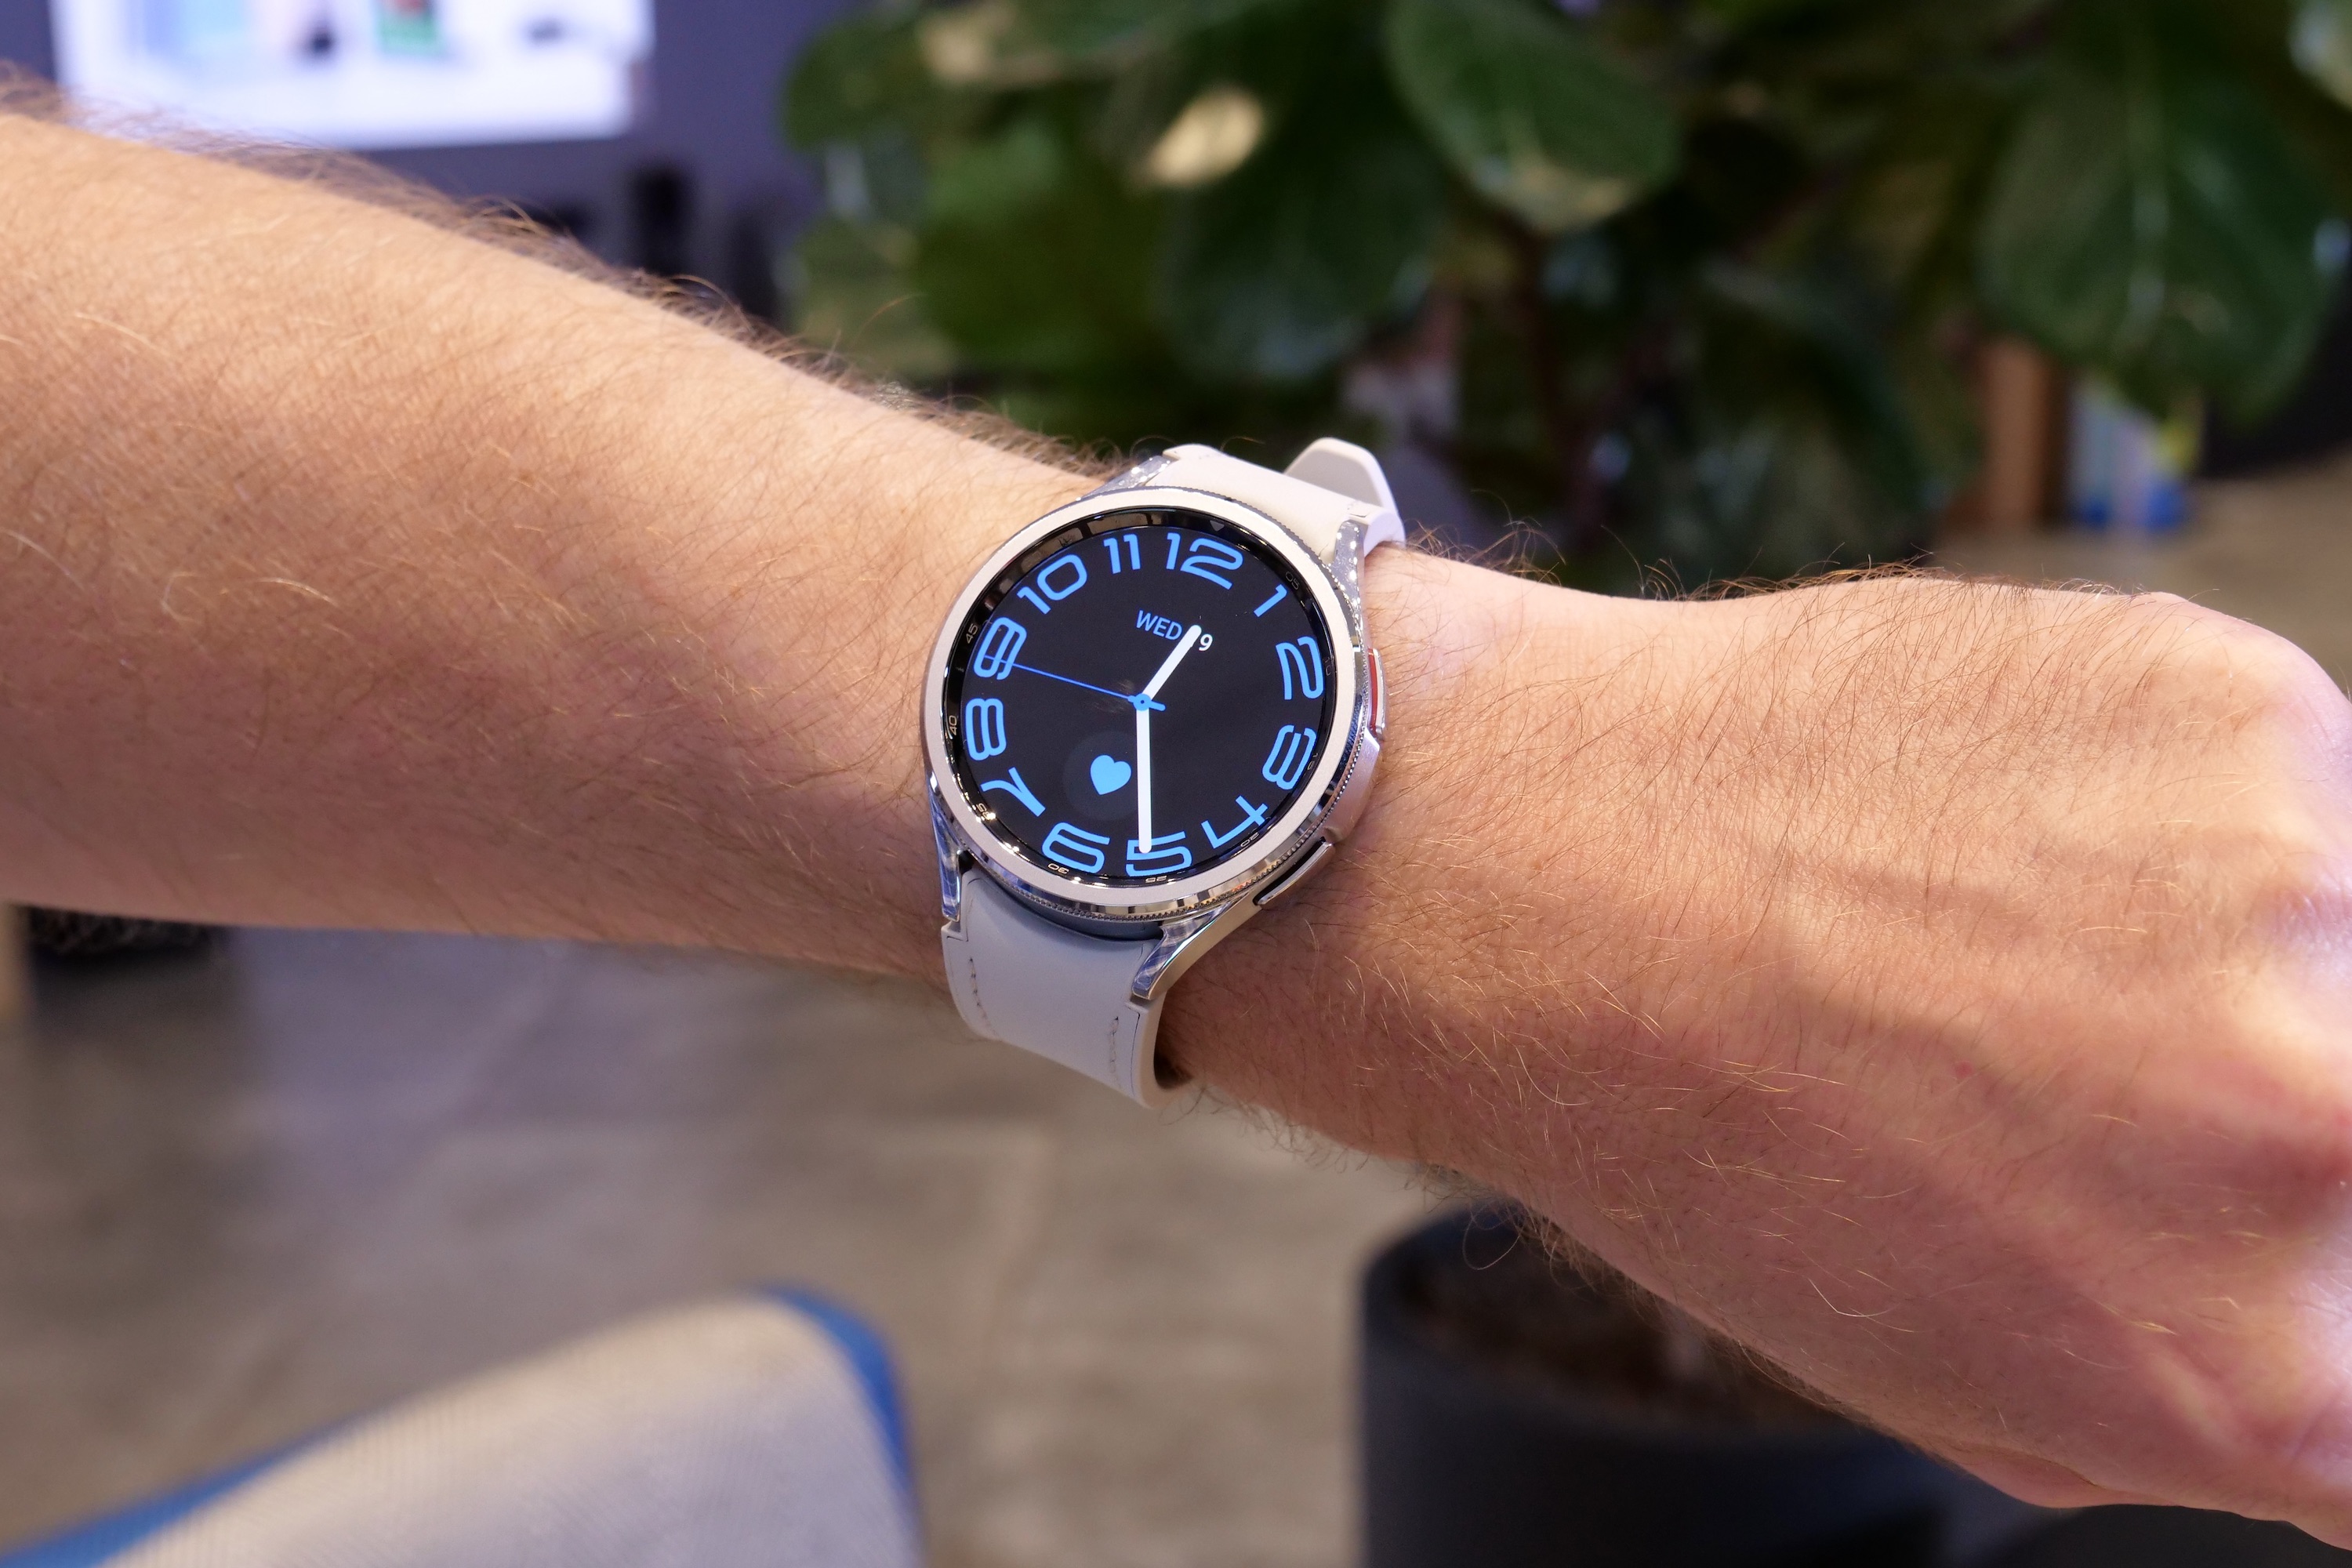 The 47mm Samsung Galaxy Watch Classic in silver.